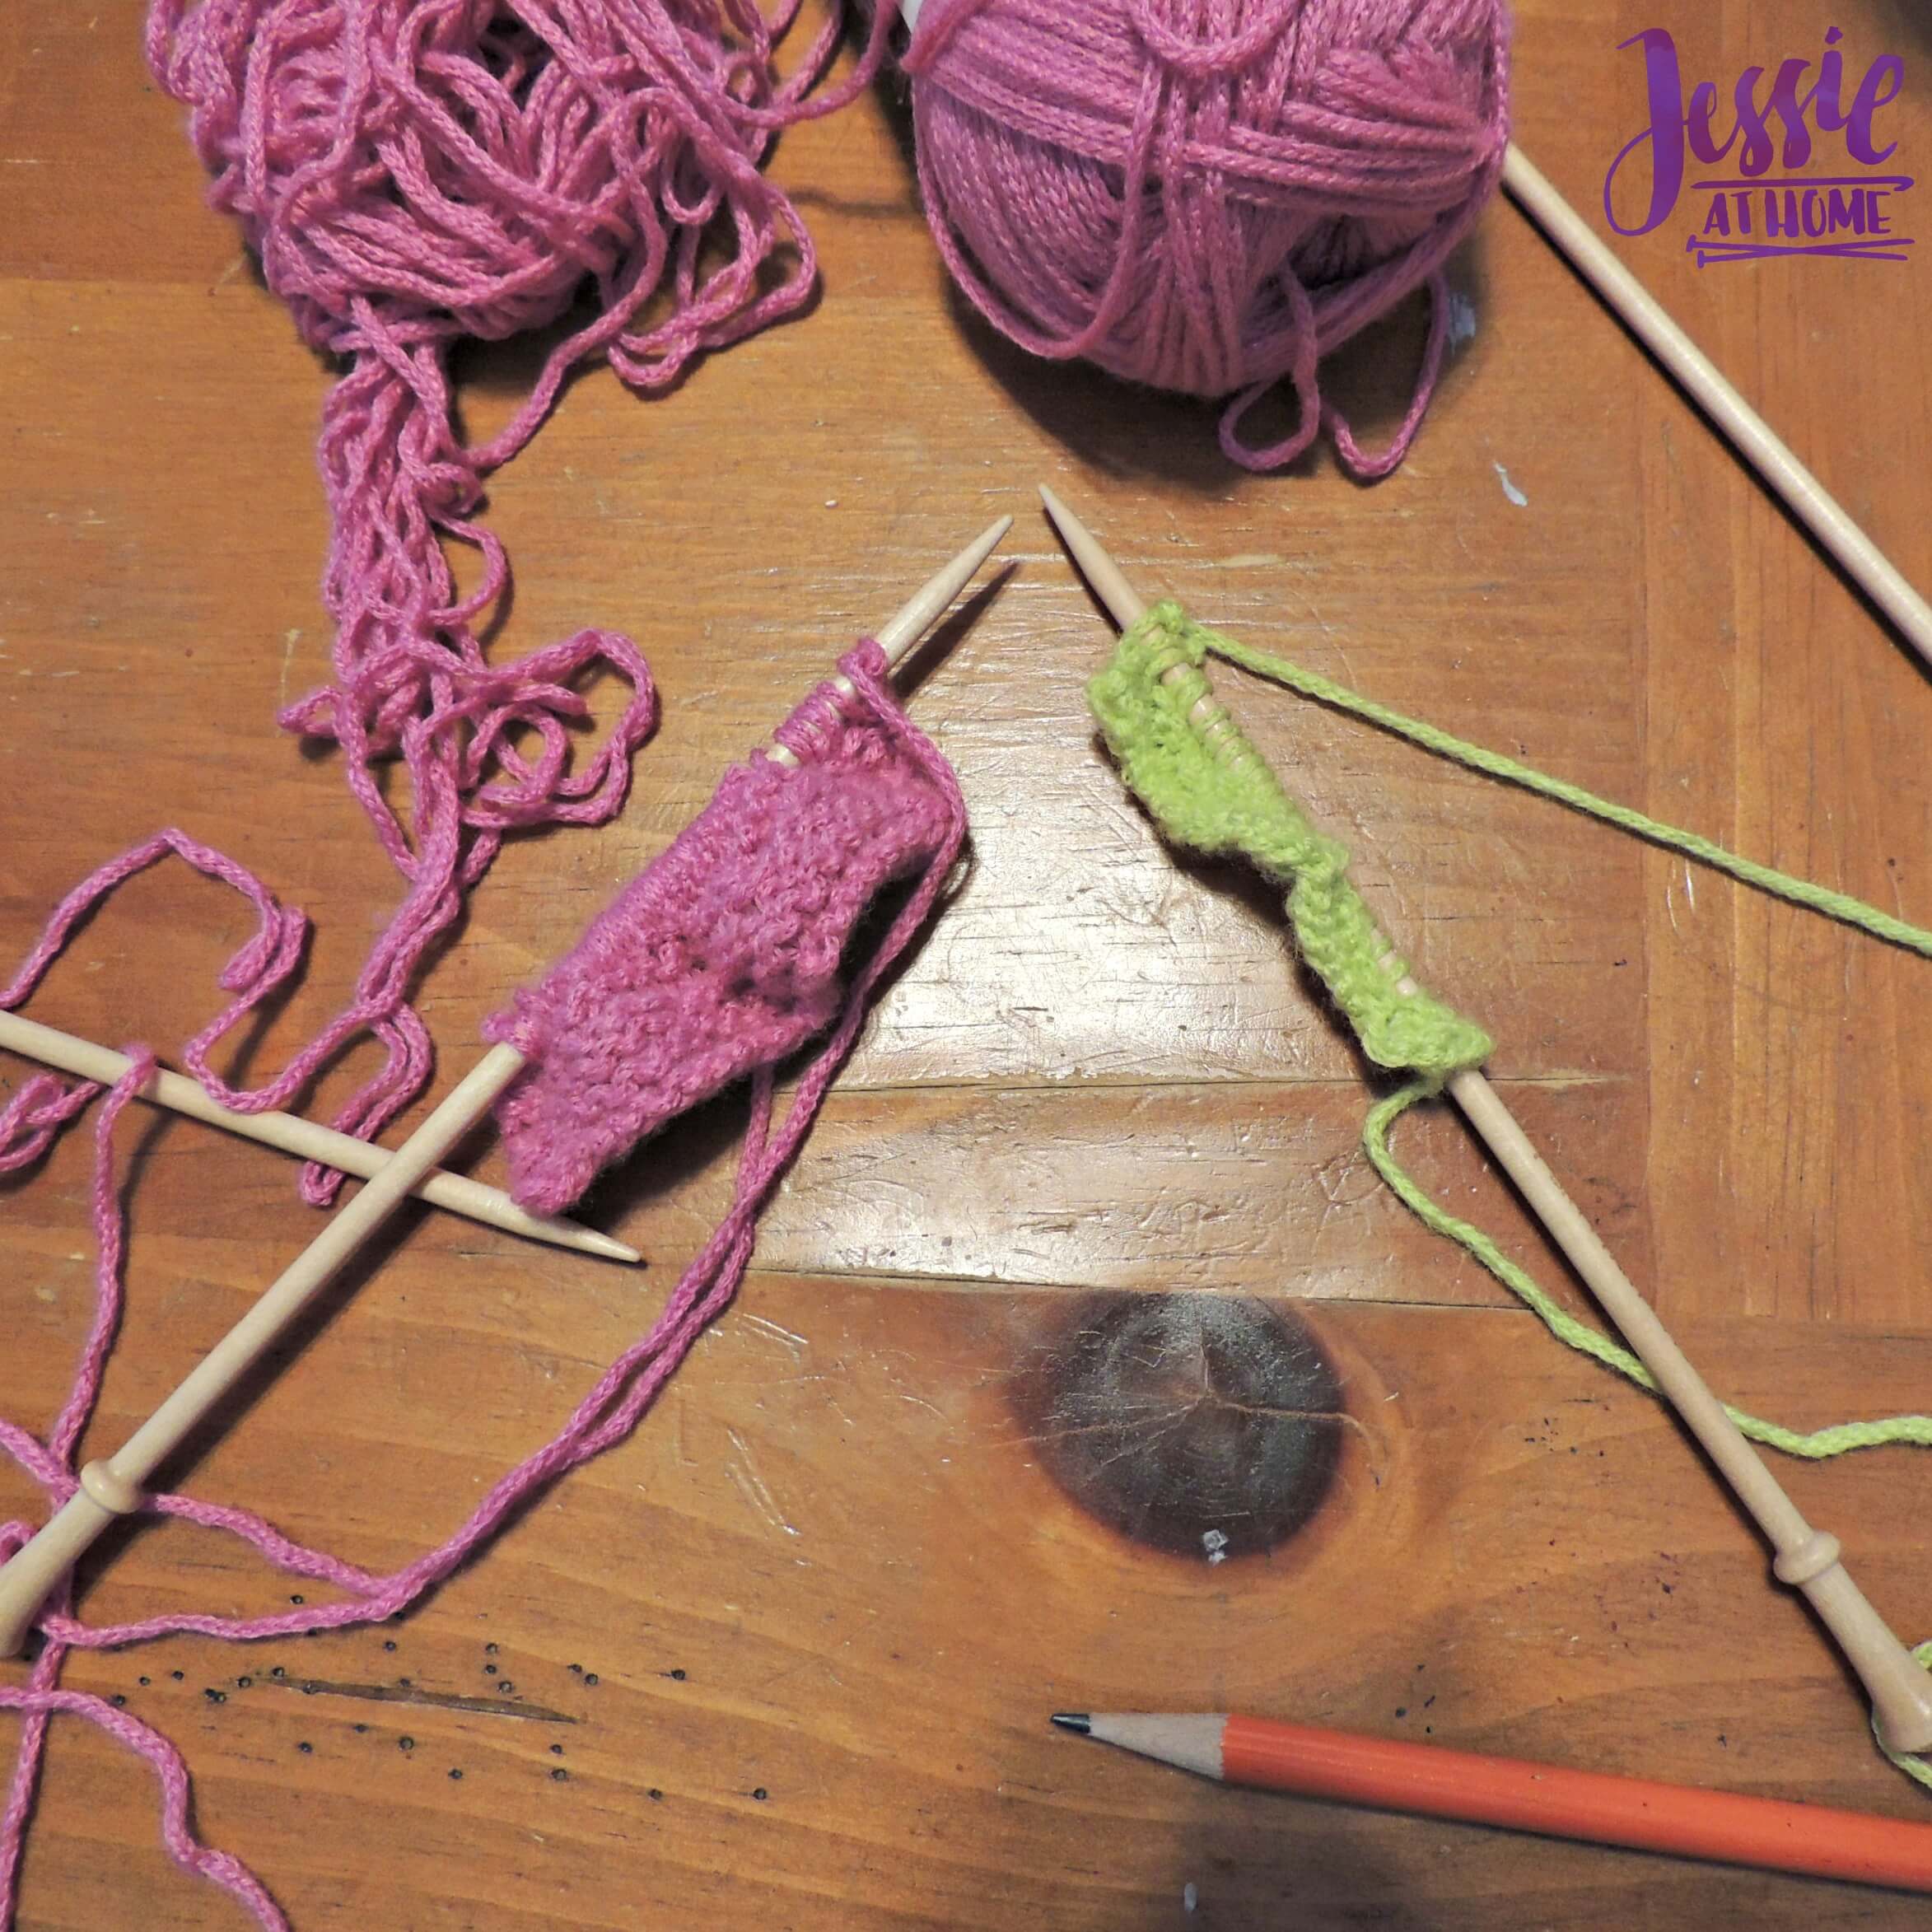 Learning to knit with Brittany short needles